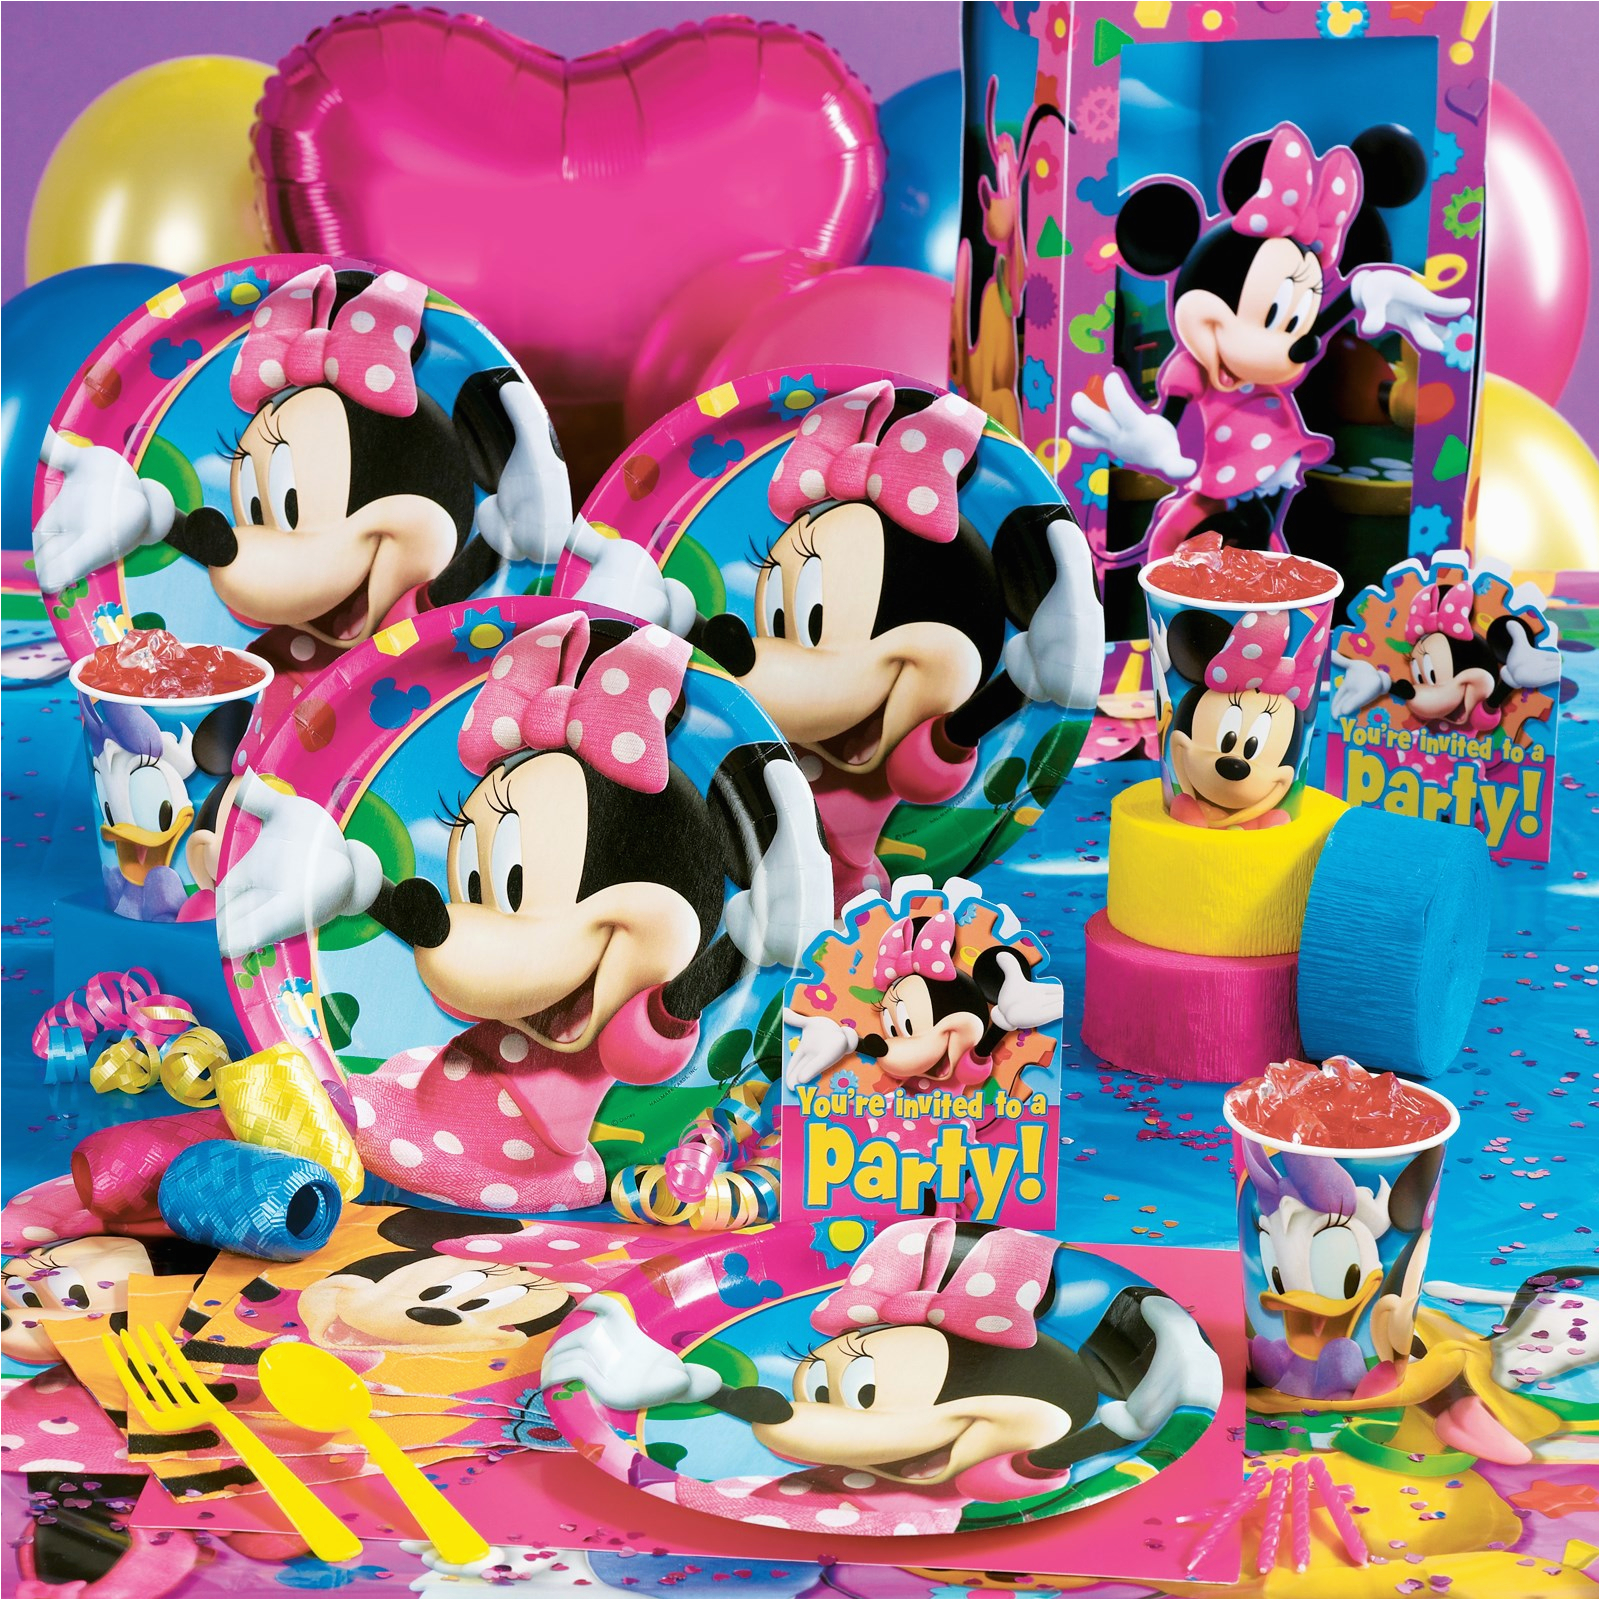 Birthday Party Decoration Materials Minnie Mouse Party Supplies Party Favors Ideas